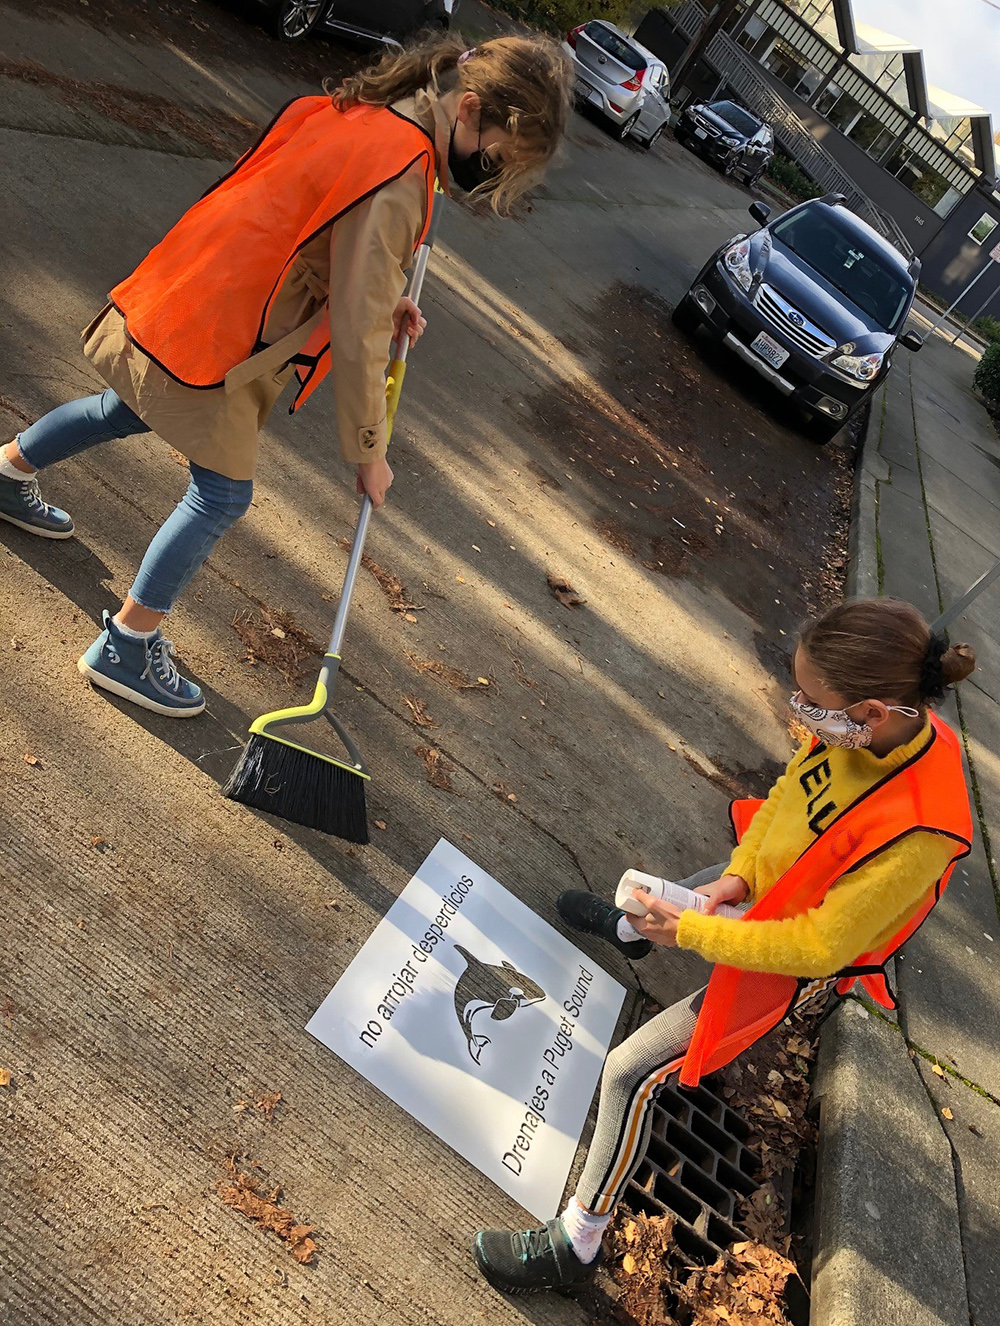 One young person wearing a safety vest sweeps the street around a storm strain while another holds a can of spray paint above a stencil reading